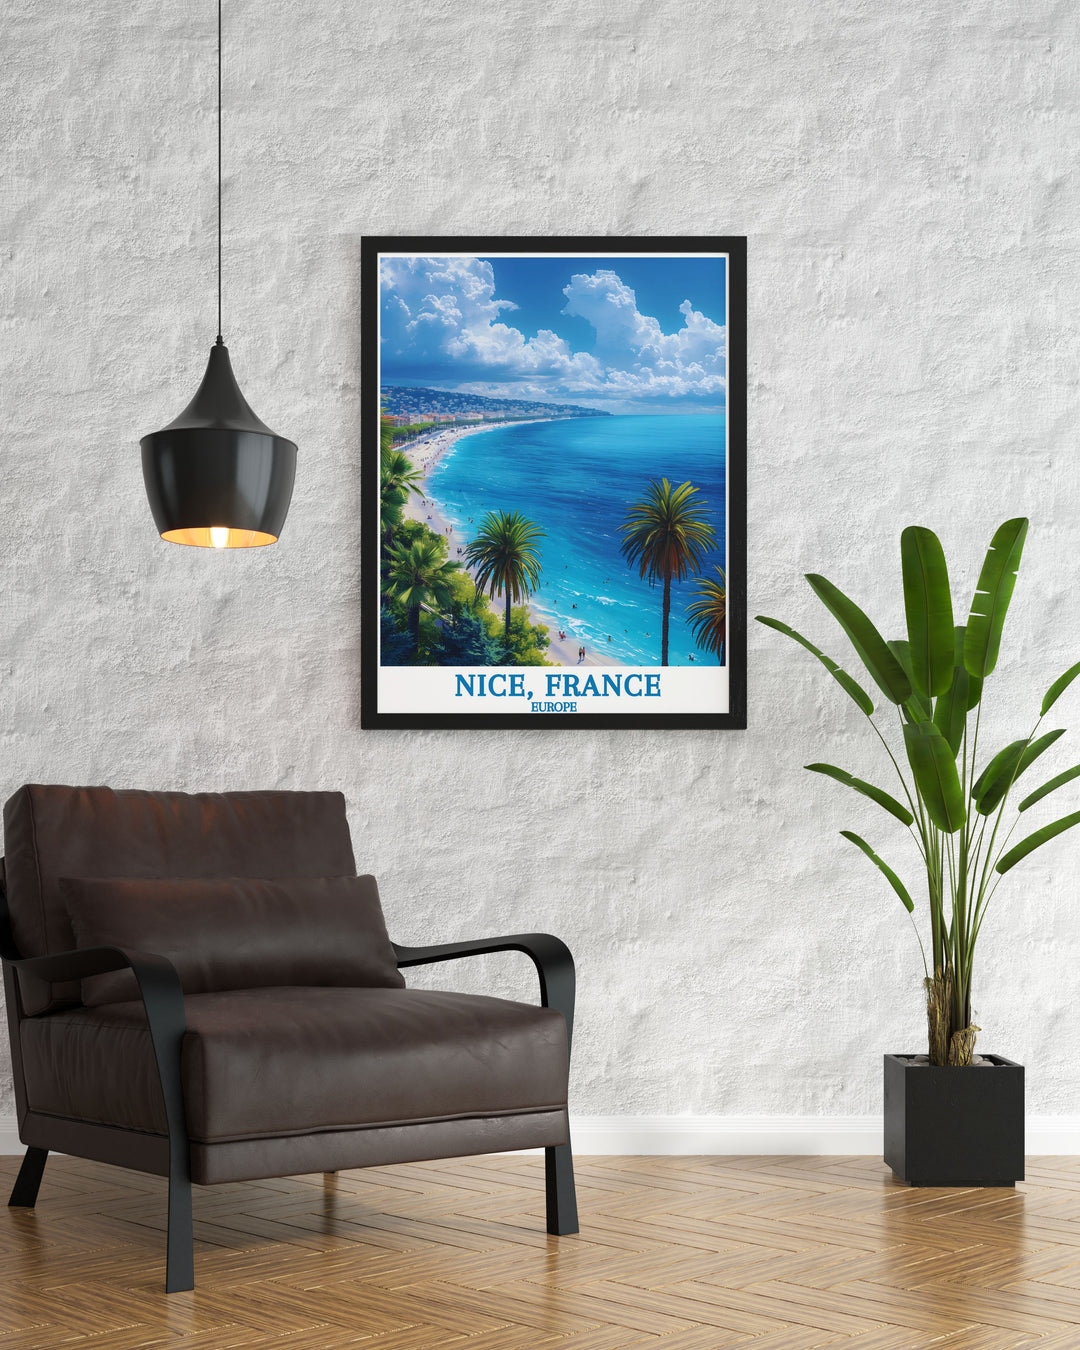 Featuring the historic Promenade des Anglais in Nice, this travel poster brings to life the vibrant atmosphere, cultural heritage, and stunning Mediterranean backdrop, making it a perfect addition to any collection of French art.